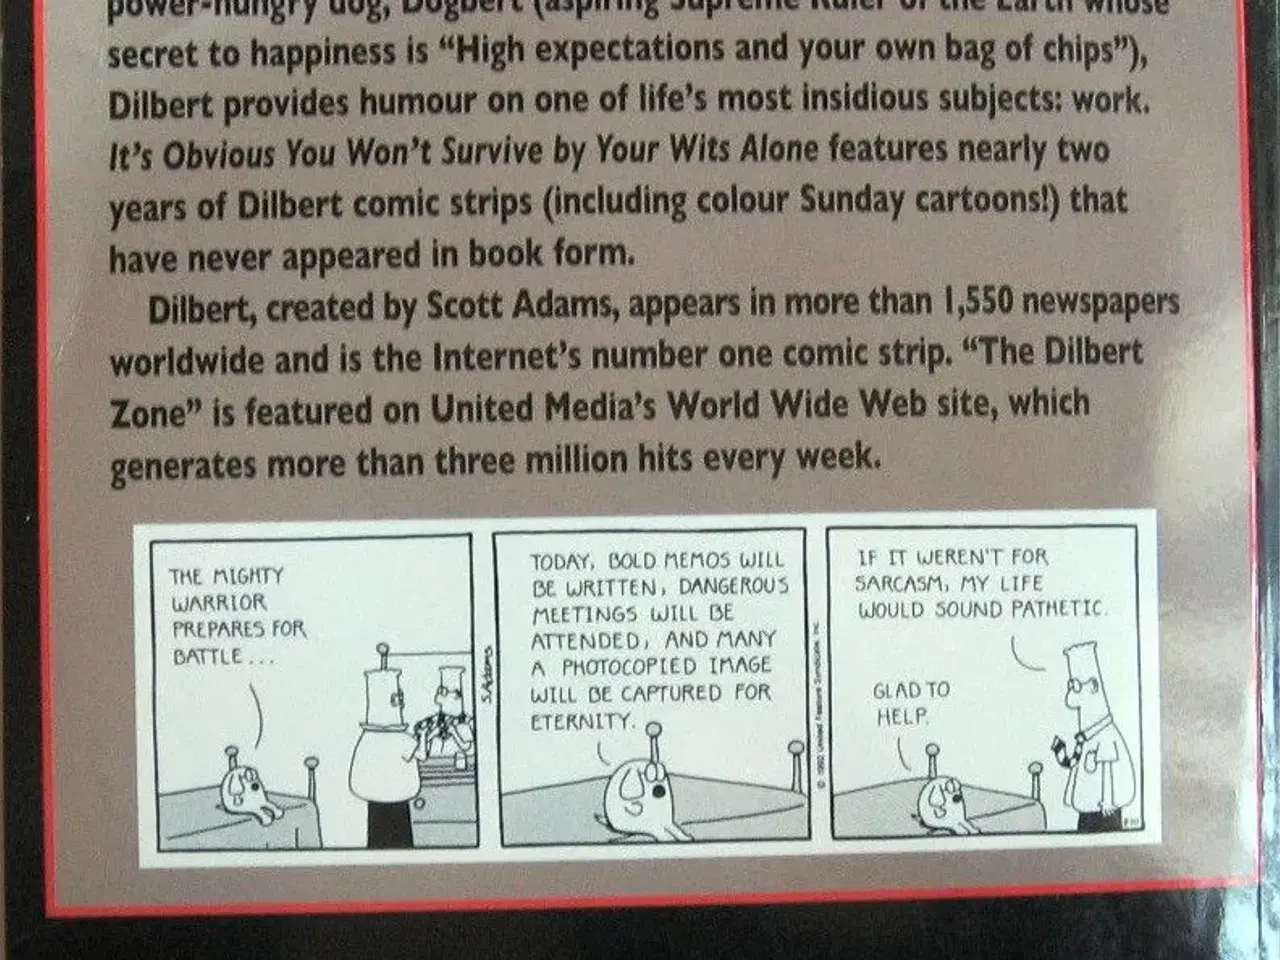 Billede 4 - Dilbert book - its obvious you wont survive by you